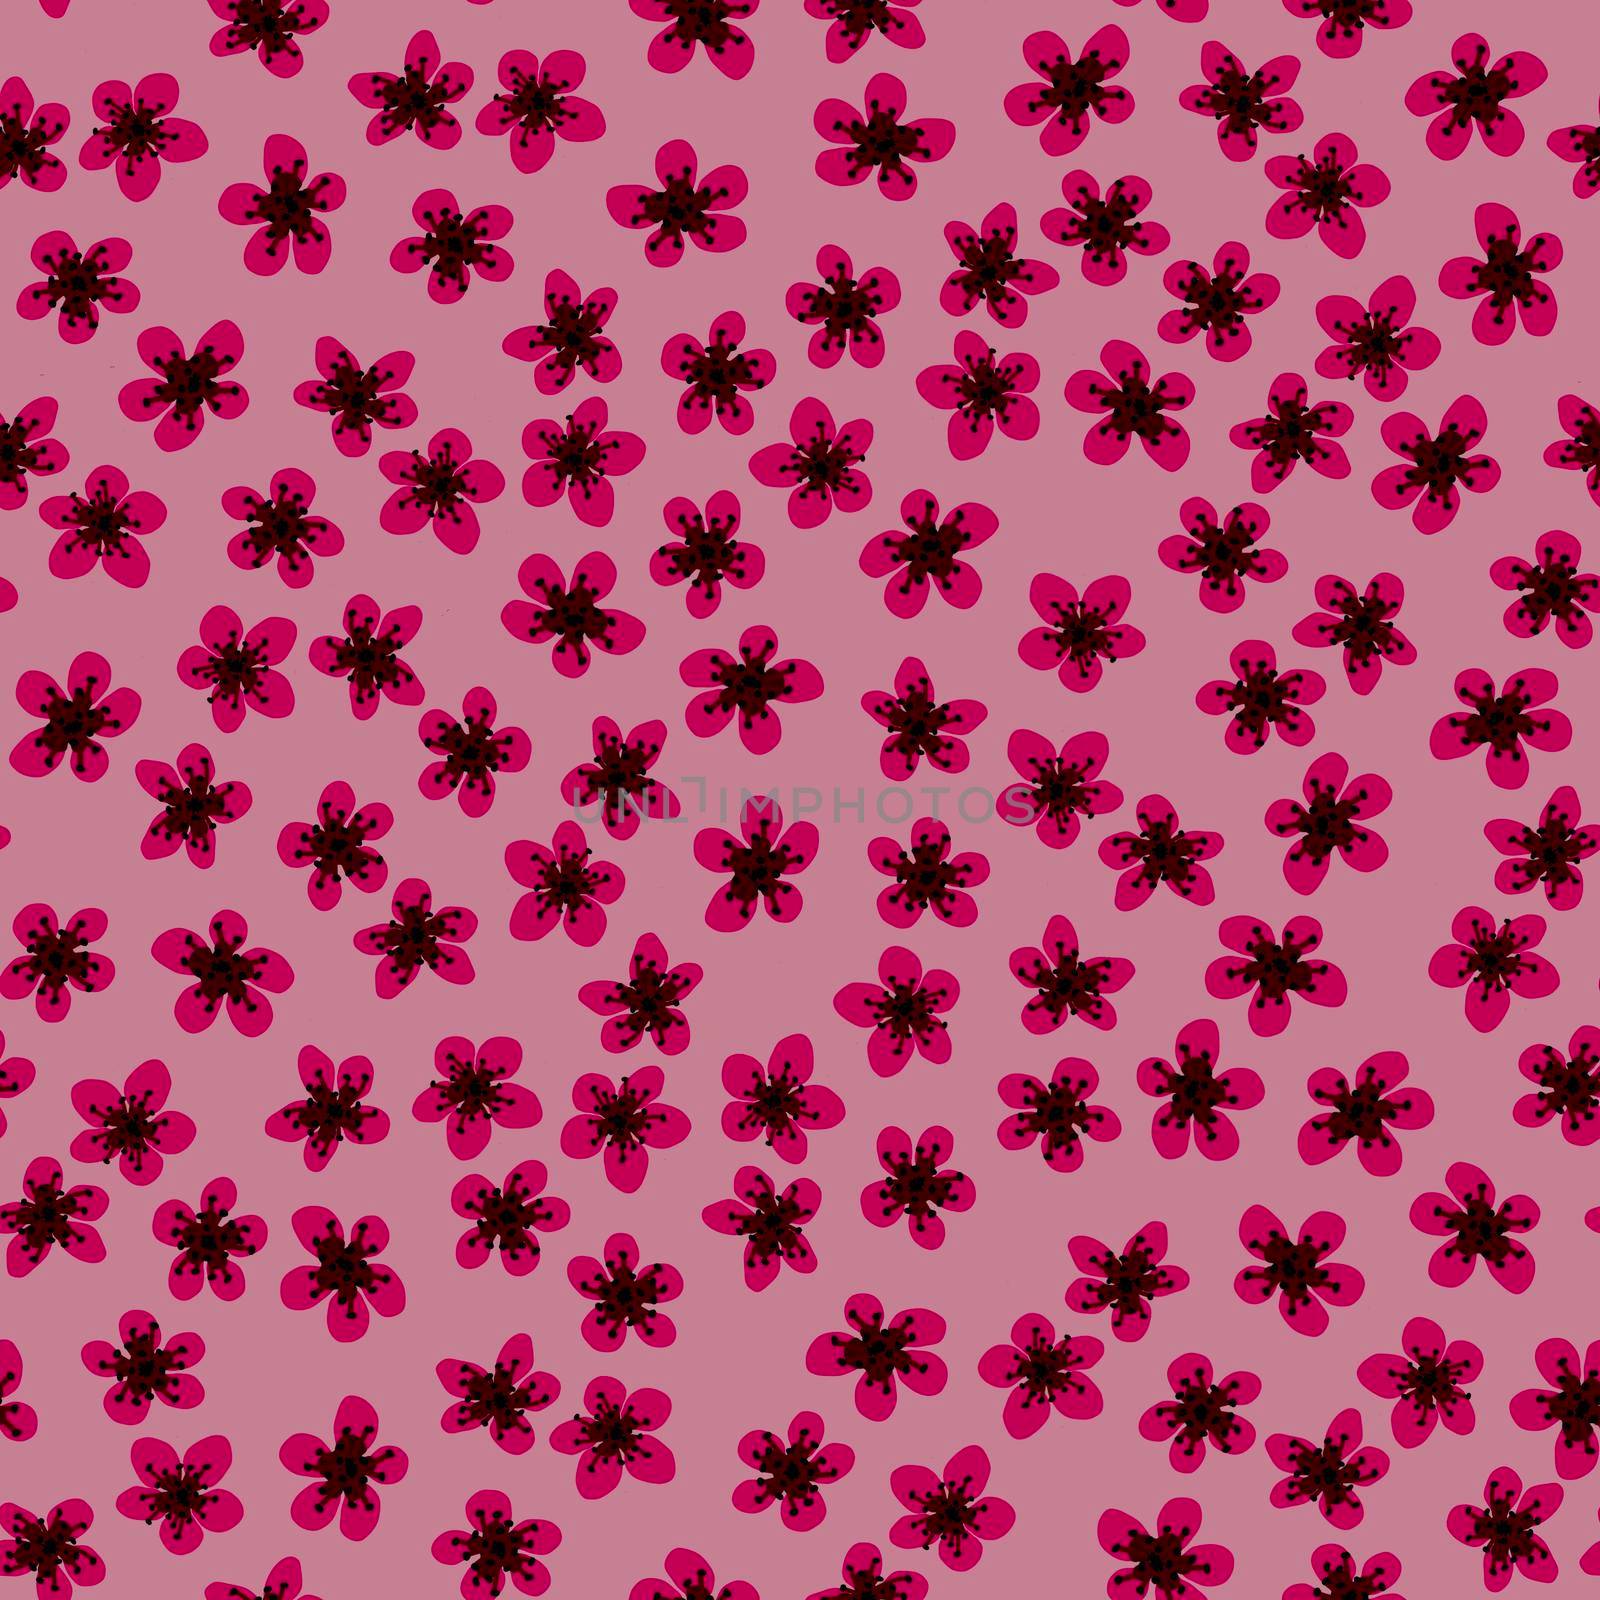 Seamless pattern with blossoming Japanese cherry sakura for fabric, packaging, wallpaper, textile decor, design, invitations, print, gift wrap, manufacturing. Fuchsia flowers on pink background. by Angelsmoon